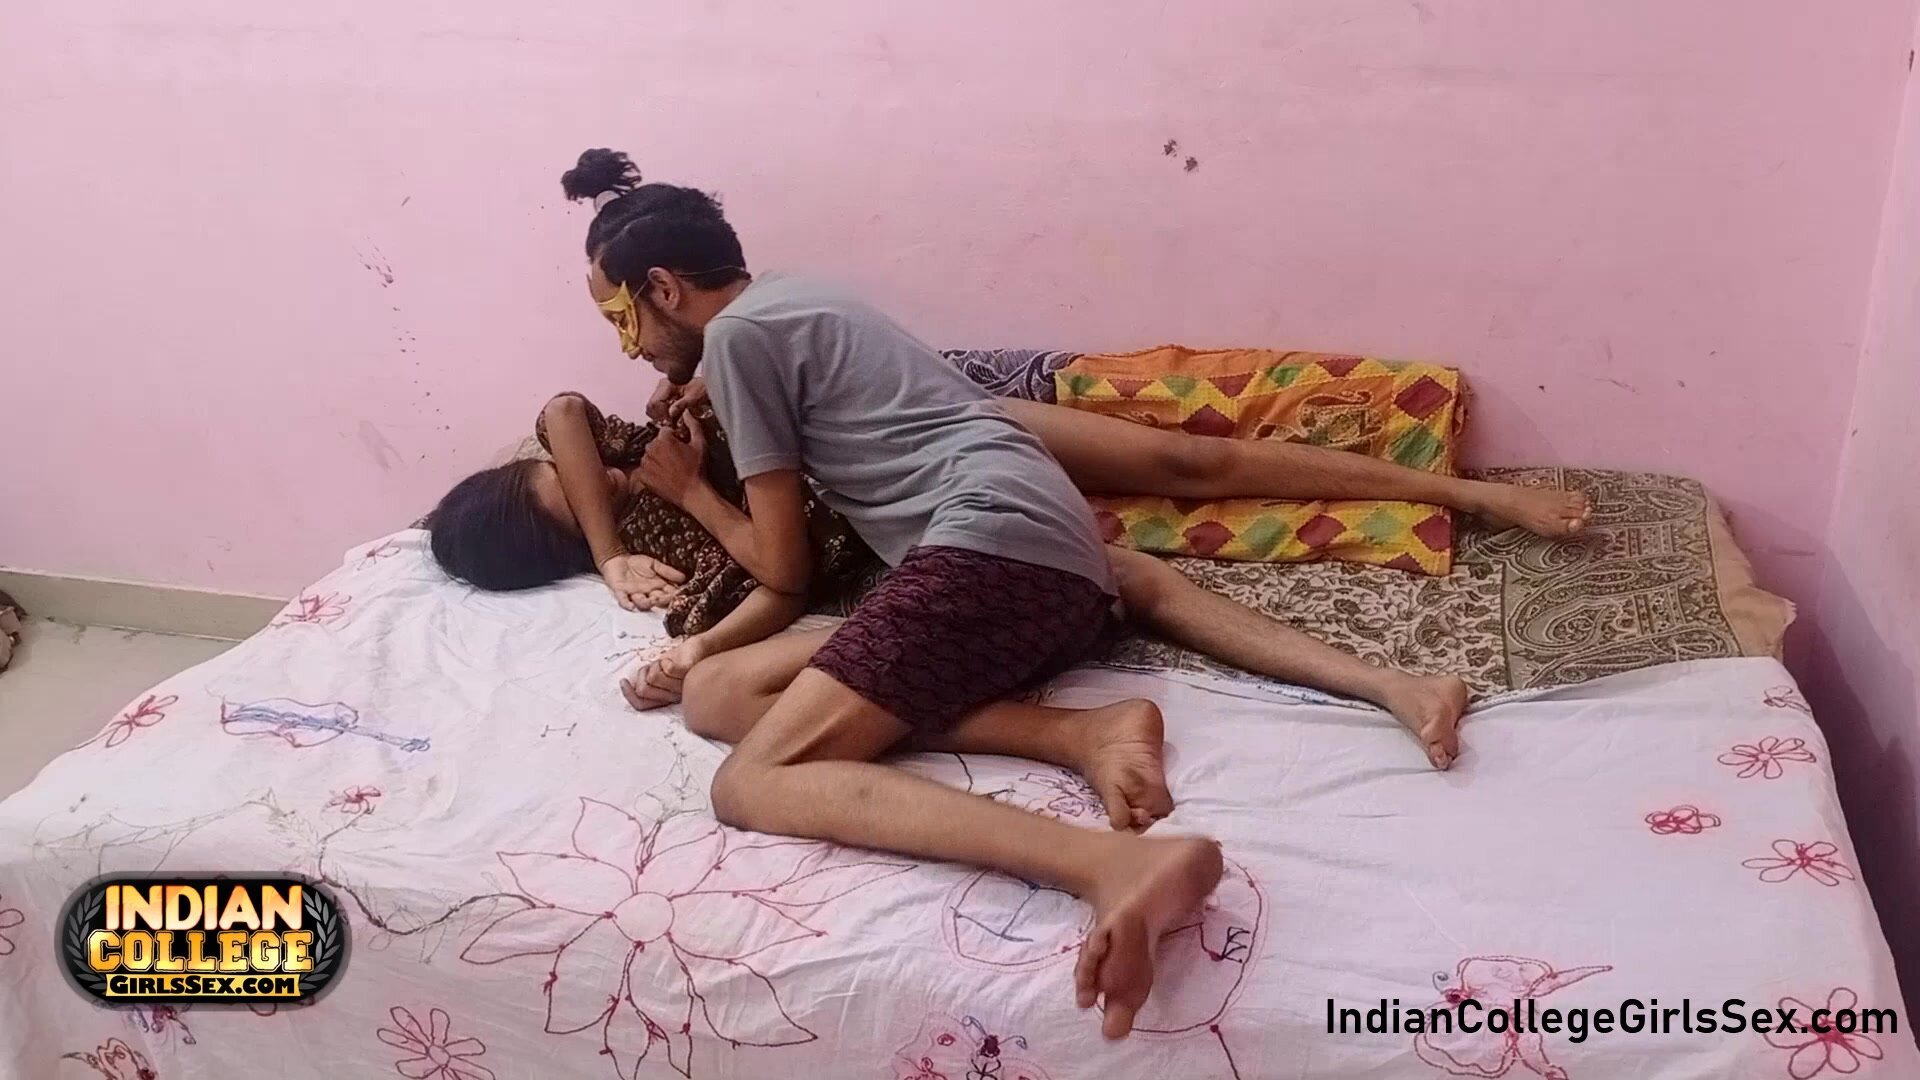 Amateur Indian skinny teen get an anal creampie after a hard desi pussy fucking sex at Fapnado image image